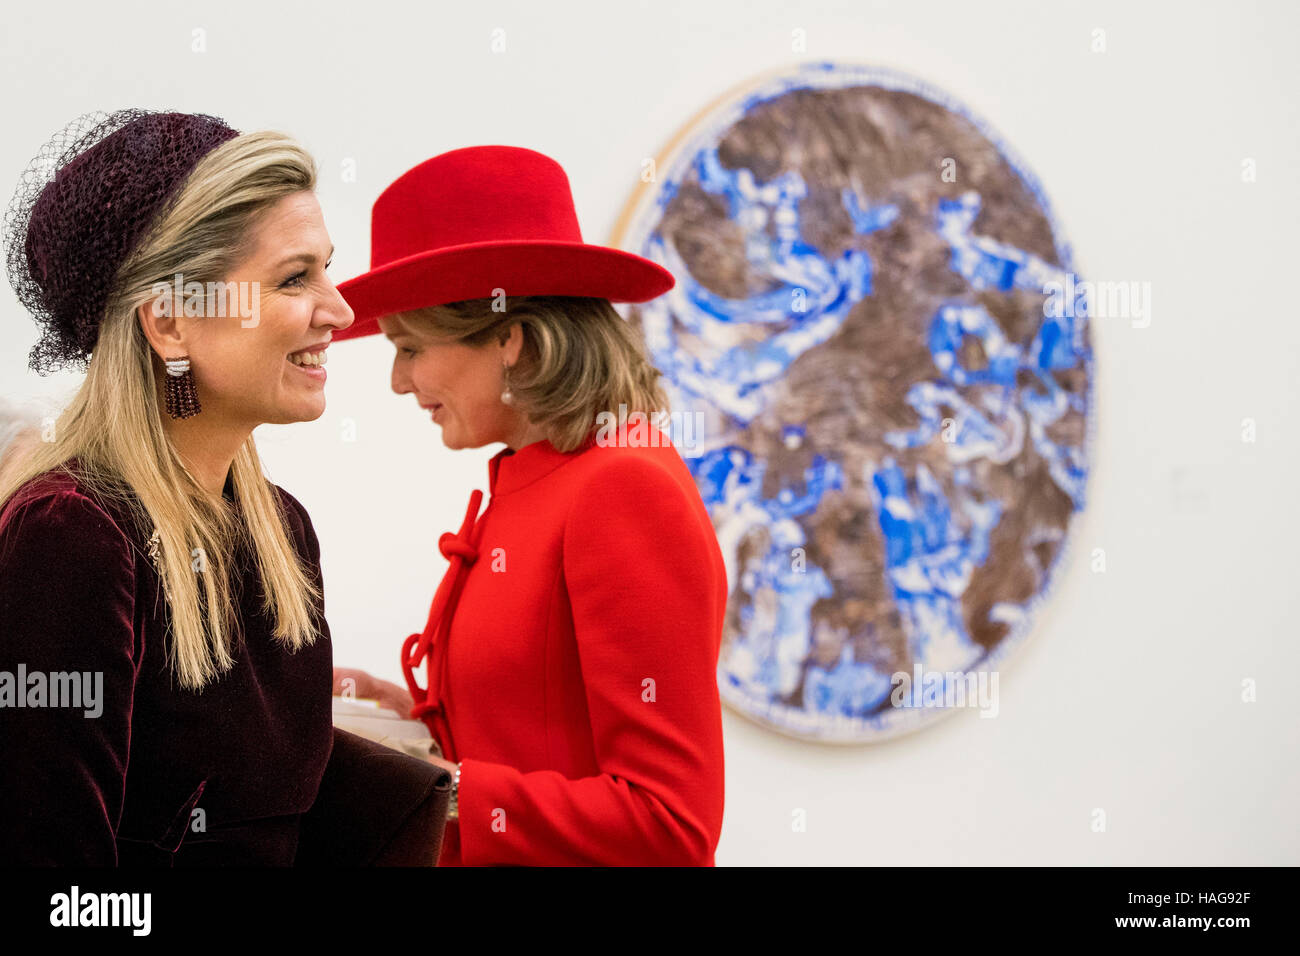 Amstelveen, The Netherlands. 29th Nov, 2016. Queen Maxima and Queen Mathilde visit the exhibition Pierre Alechinsky Post Cobra at the Cobra Museum in Amstelveen, The Netherlands, 29 November 2016. The King and Queen of Belgium bring a 3 day state visit to the Netherlands. Photo: Patrick van Katwijk - NO WIRE SERVICE - Photo: Patrick van Katwijk/Dutch Photo Press/dpa/Alamy Live News Stock Photo